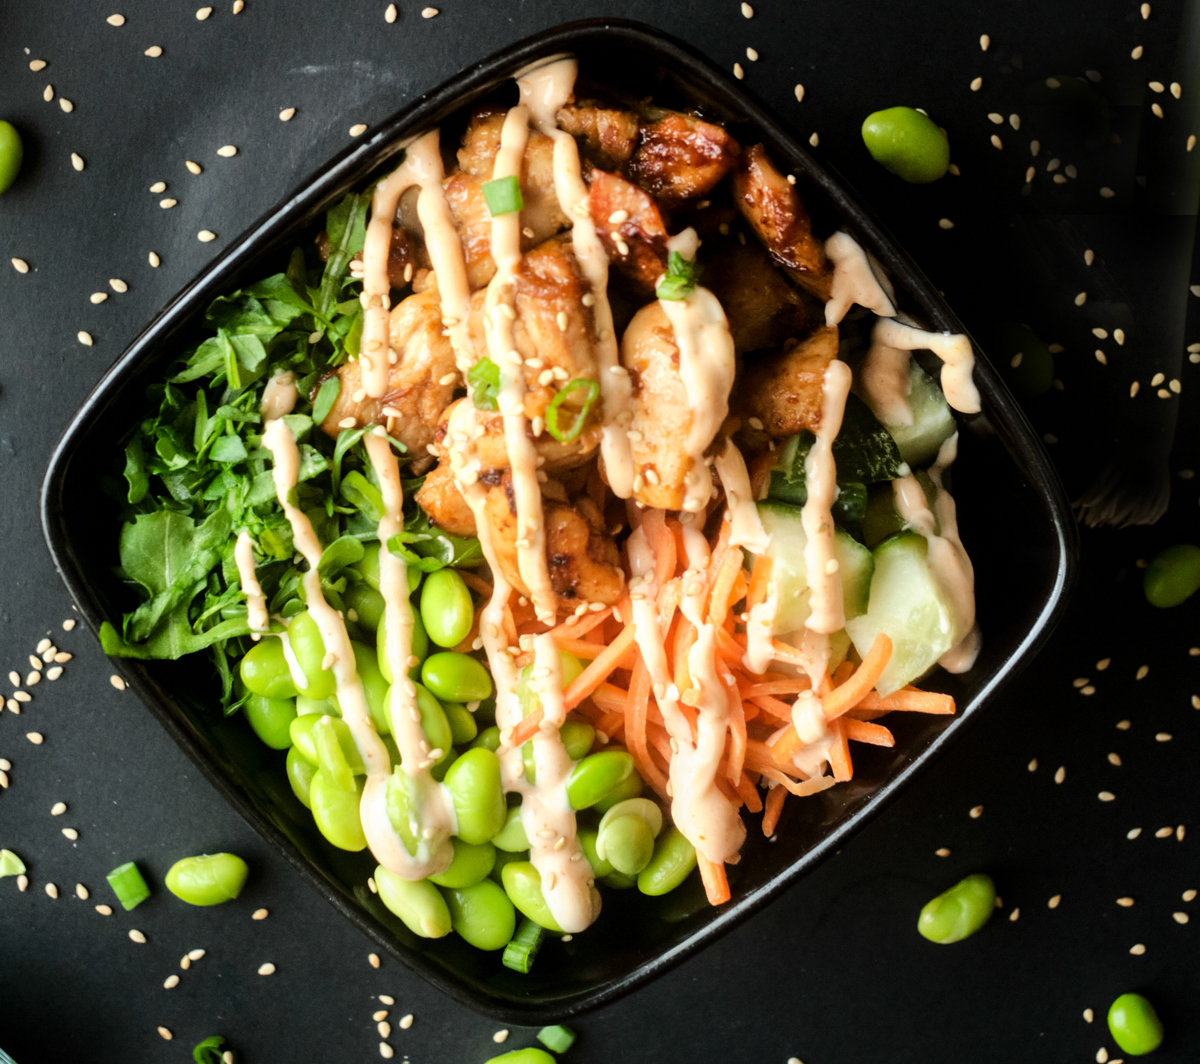 chicken poke bowl made with chicken thighs, edamame, shredded carrots, chopped cucumber and topped with sriracha mayo